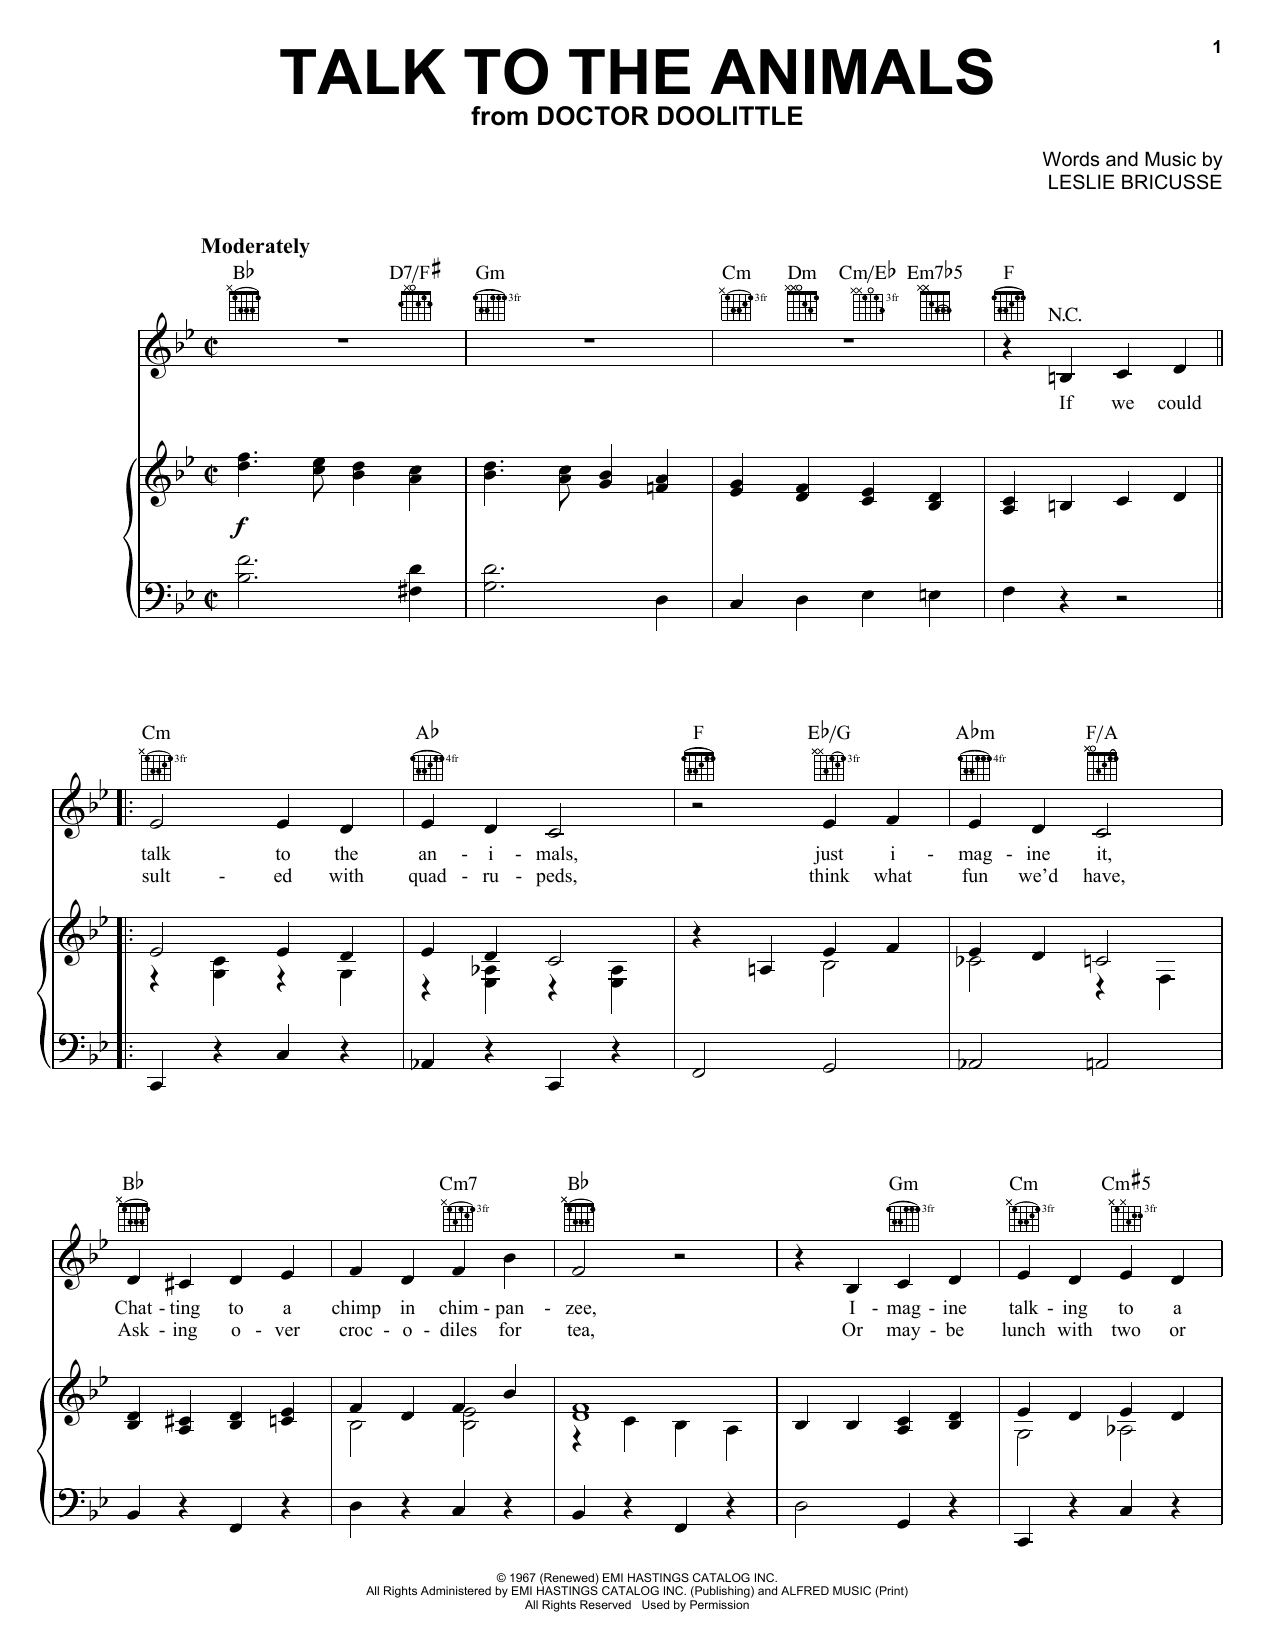 Bobby Darin Talk To The Animals sheet music notes and chords. Download Printable PDF.